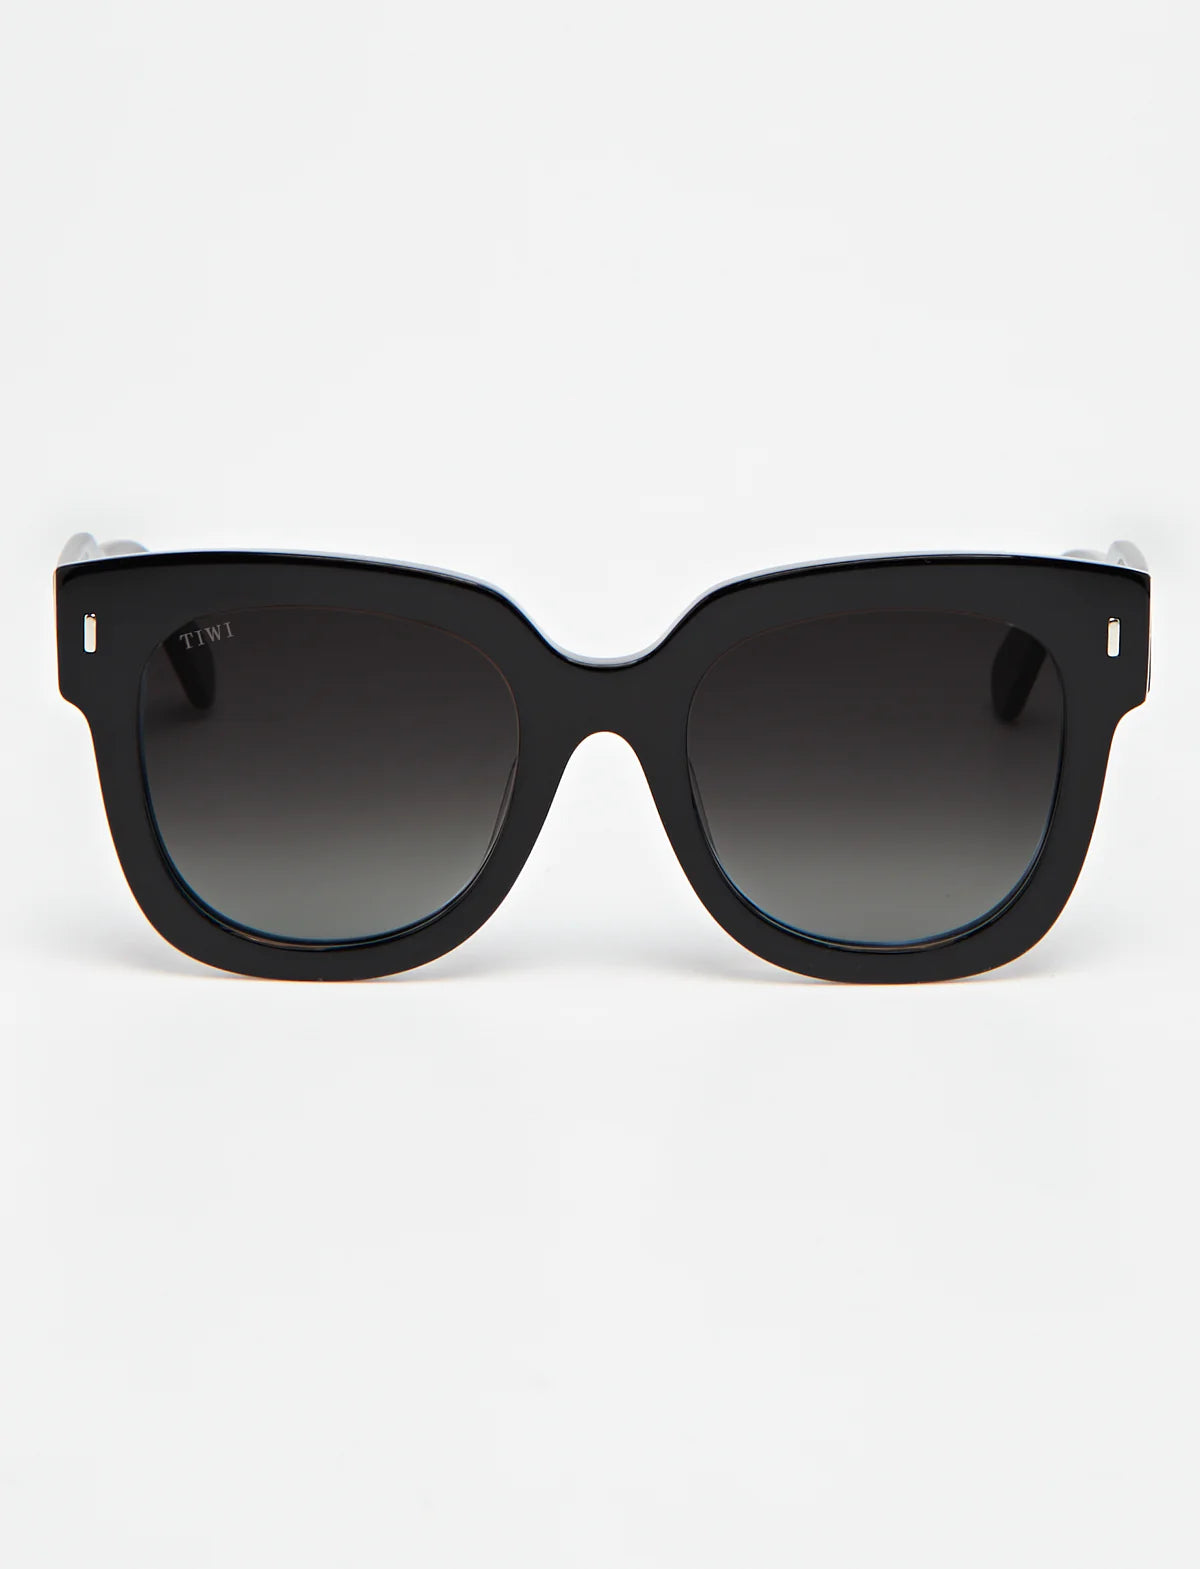 Limited Edition - Collection 1/300 Sunglasses TIWI USA Kerr Black Limited Edition 1/300  